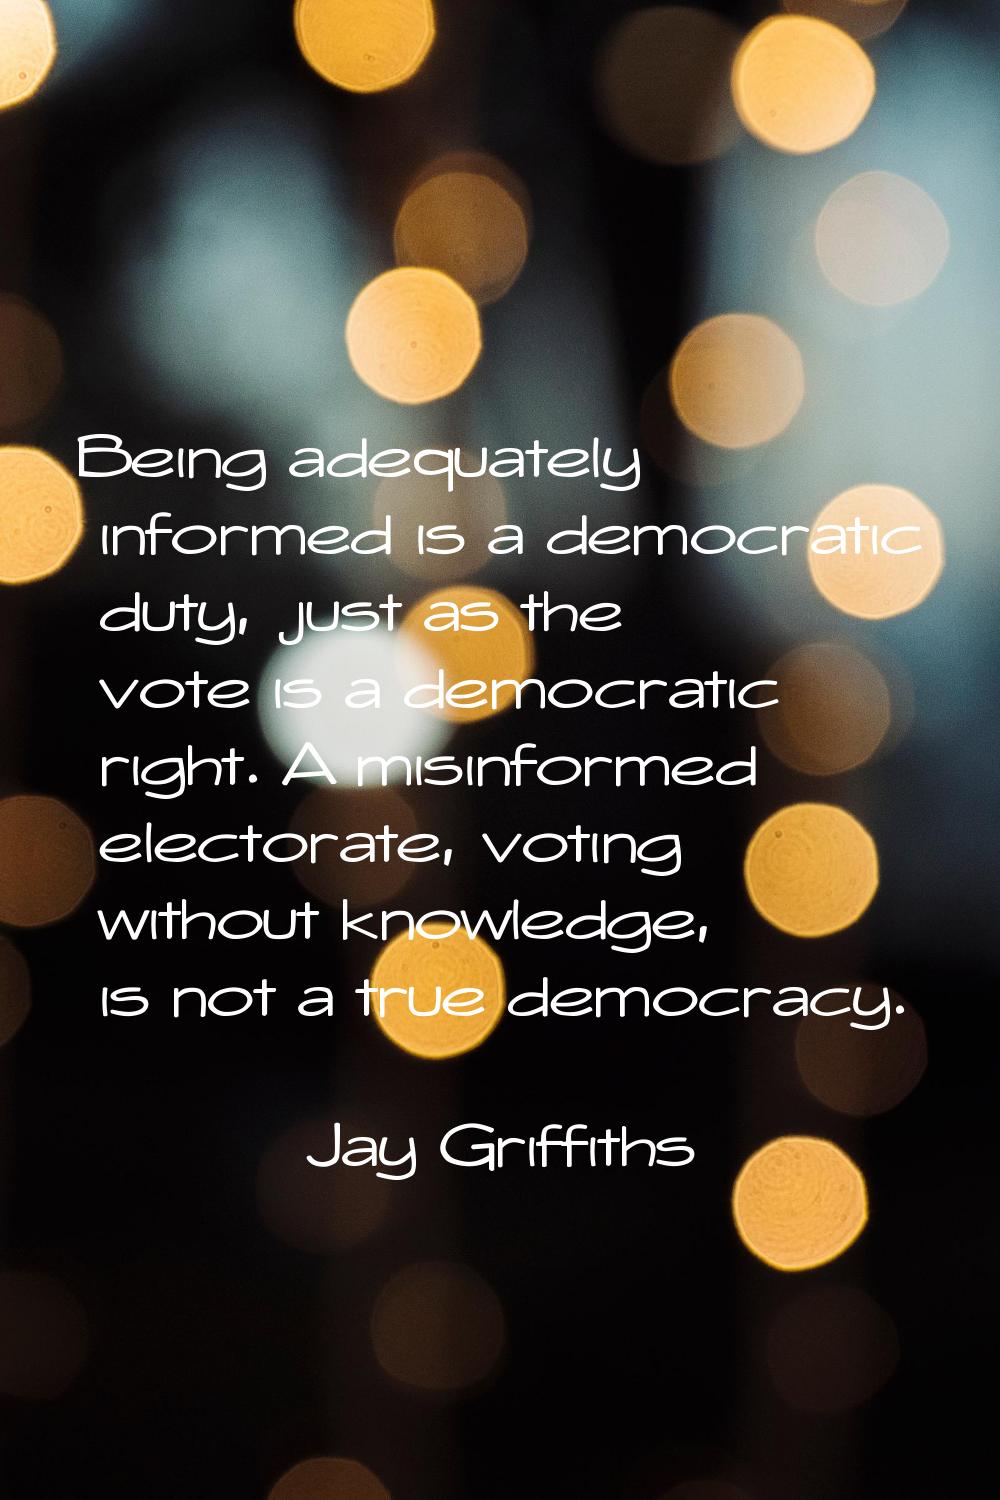 Being adequately informed is a democratic duty, just as the vote is a democratic right. A misinform